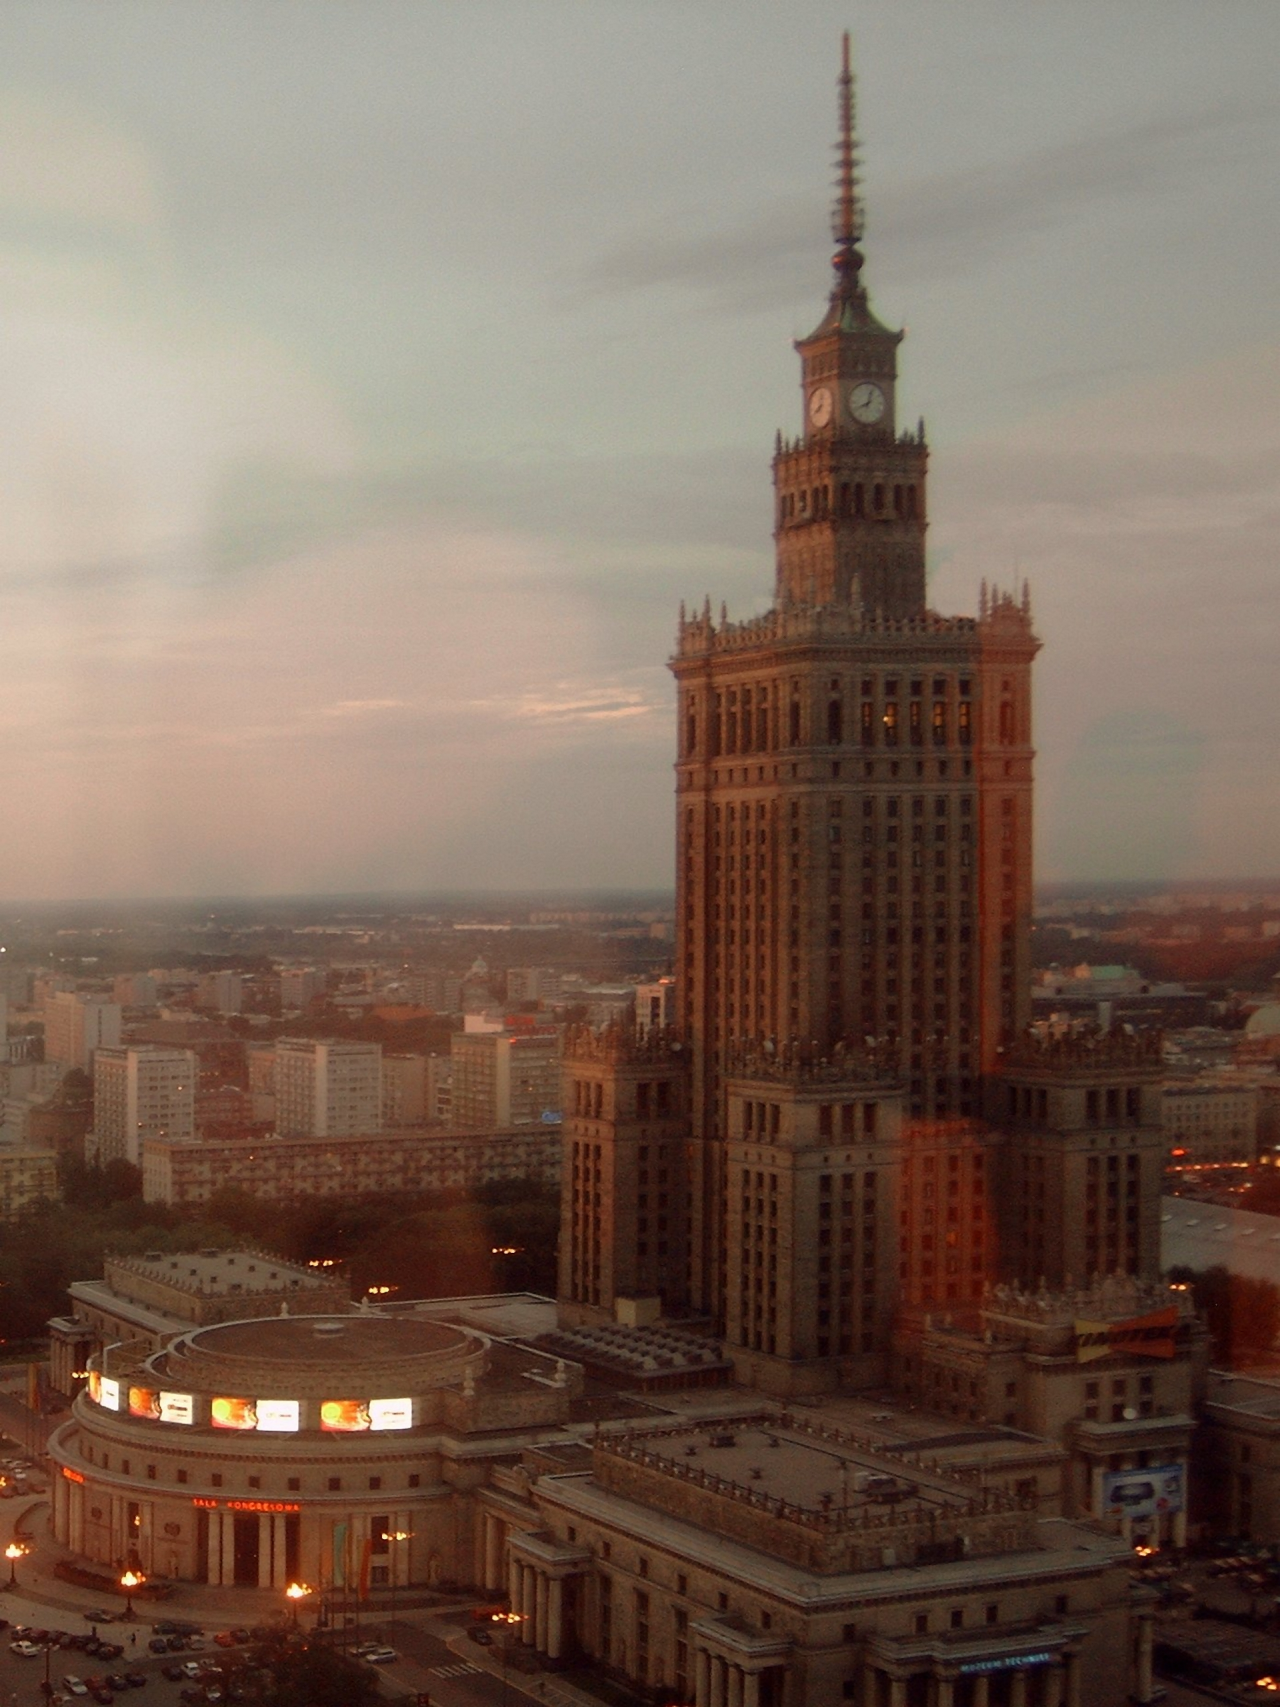 cityhopper2: “ Palace of Culture and Science, Warsaw, August 2007 ...